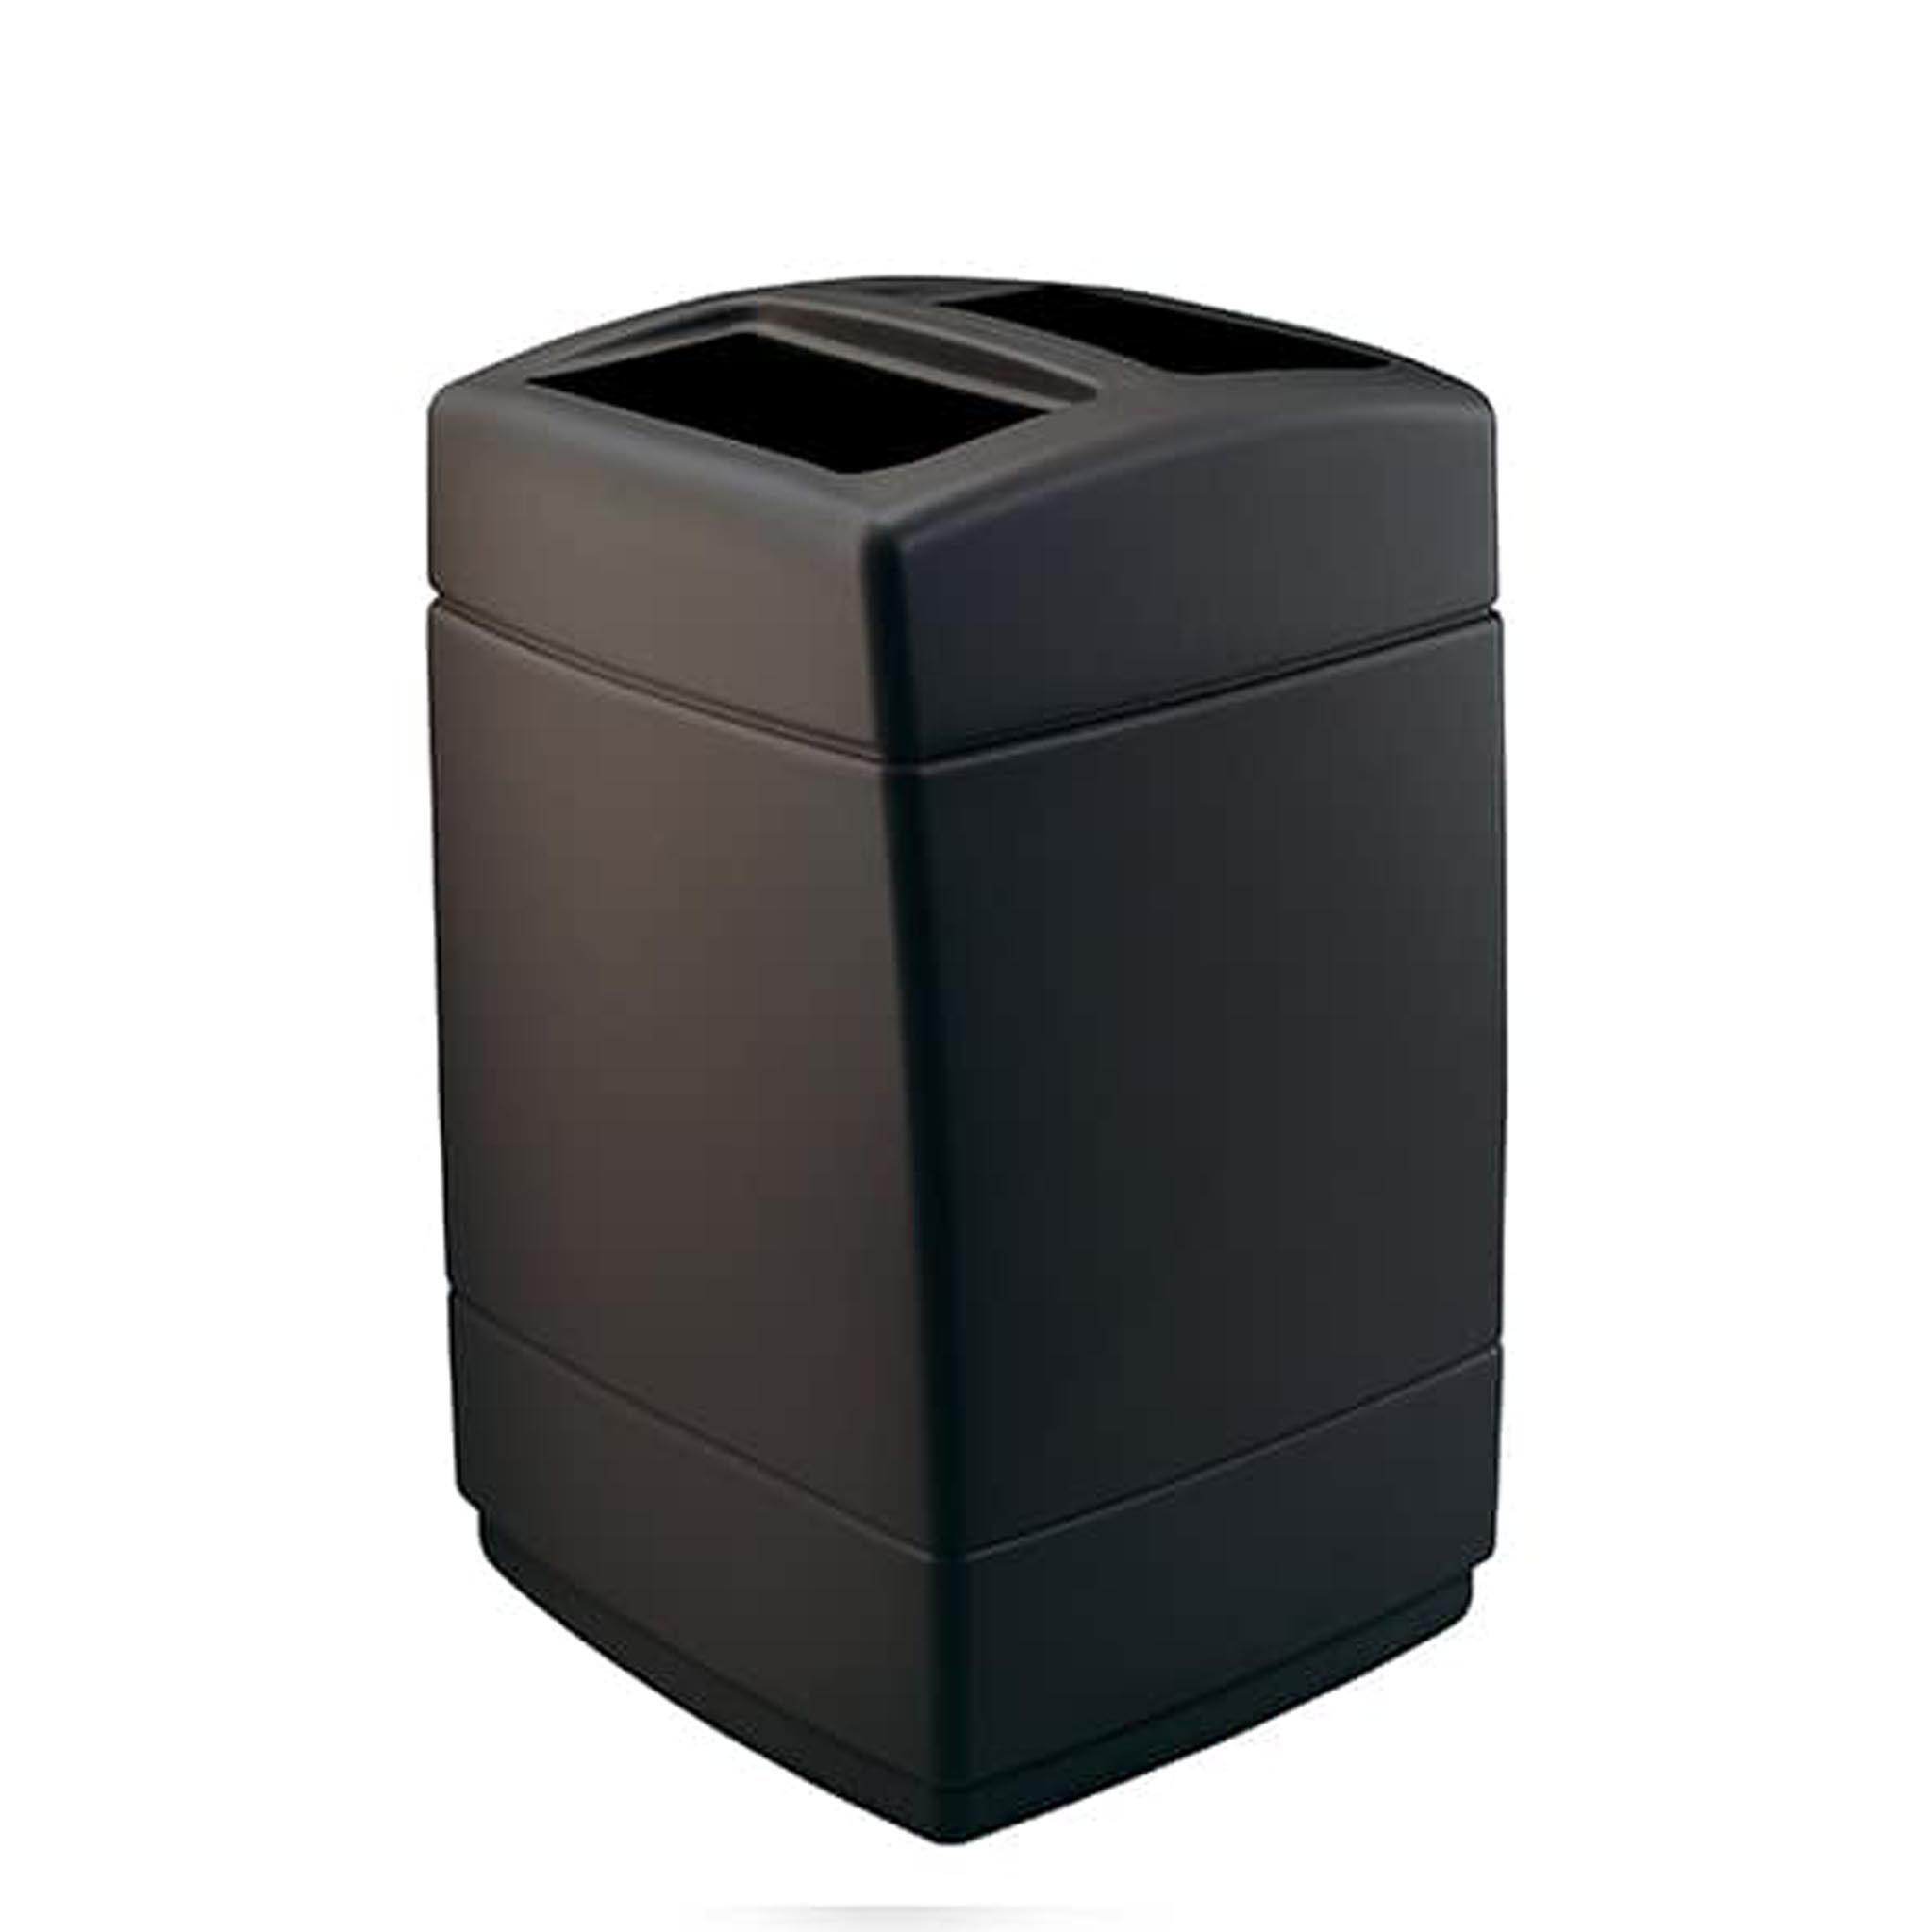 55 Gallon Clear Recycling Bin Liners